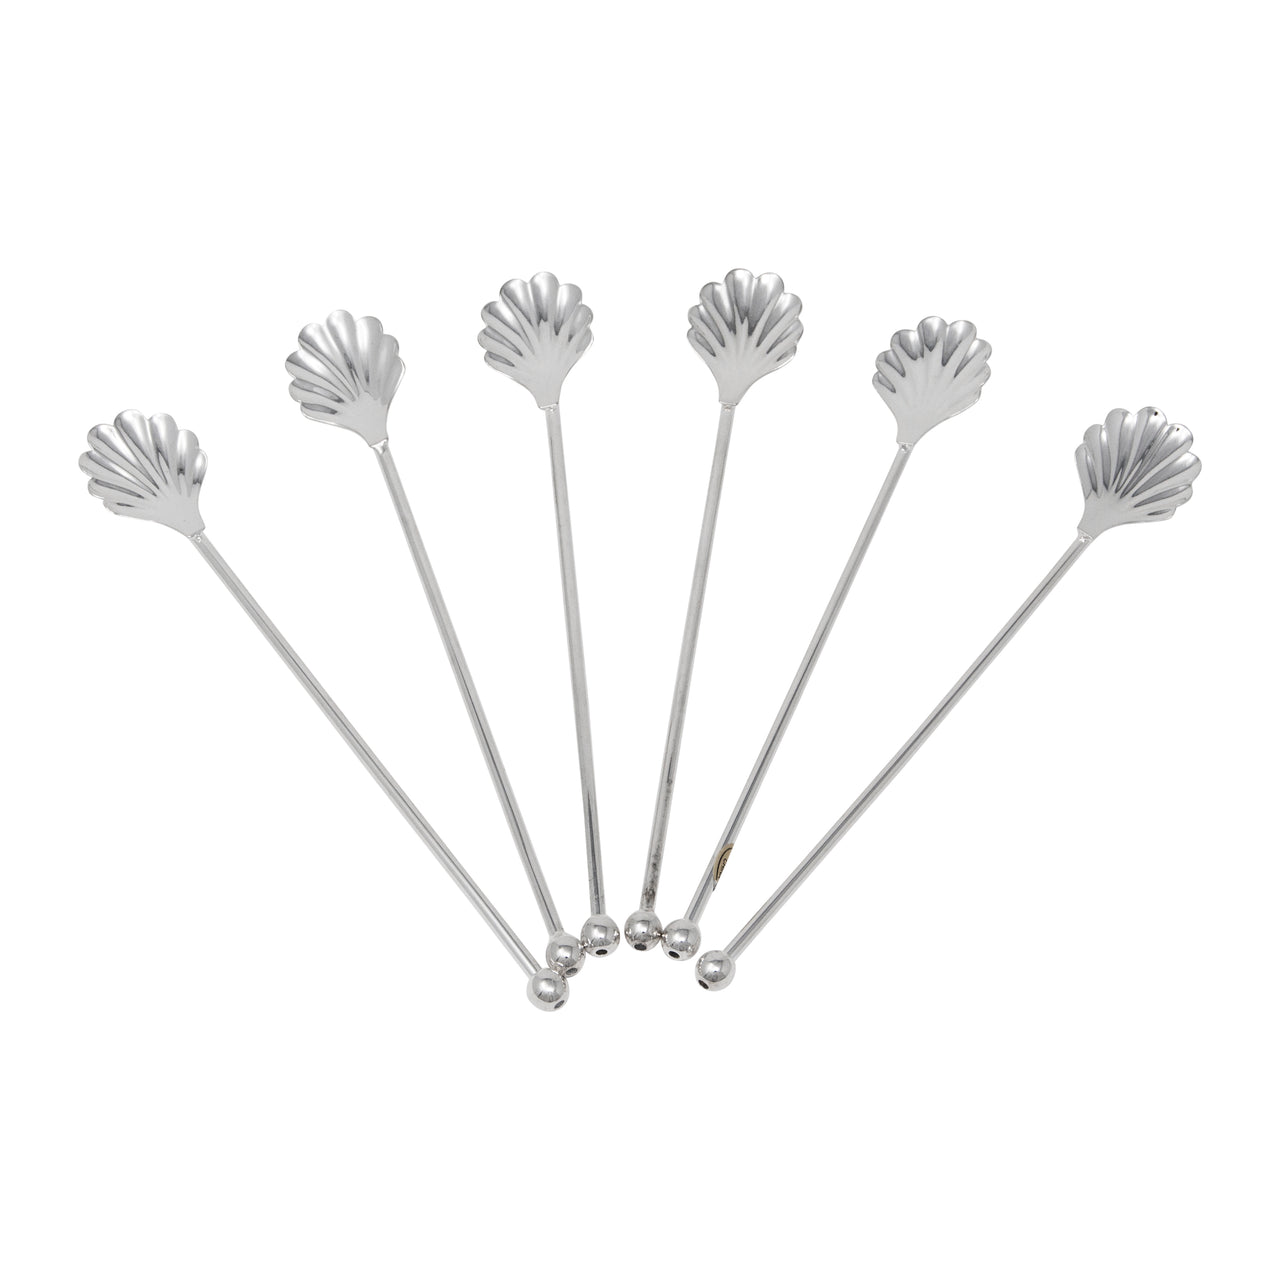 Vintage Winthrop Silver Plate Shell Spoon Sipper Straws | The Hour